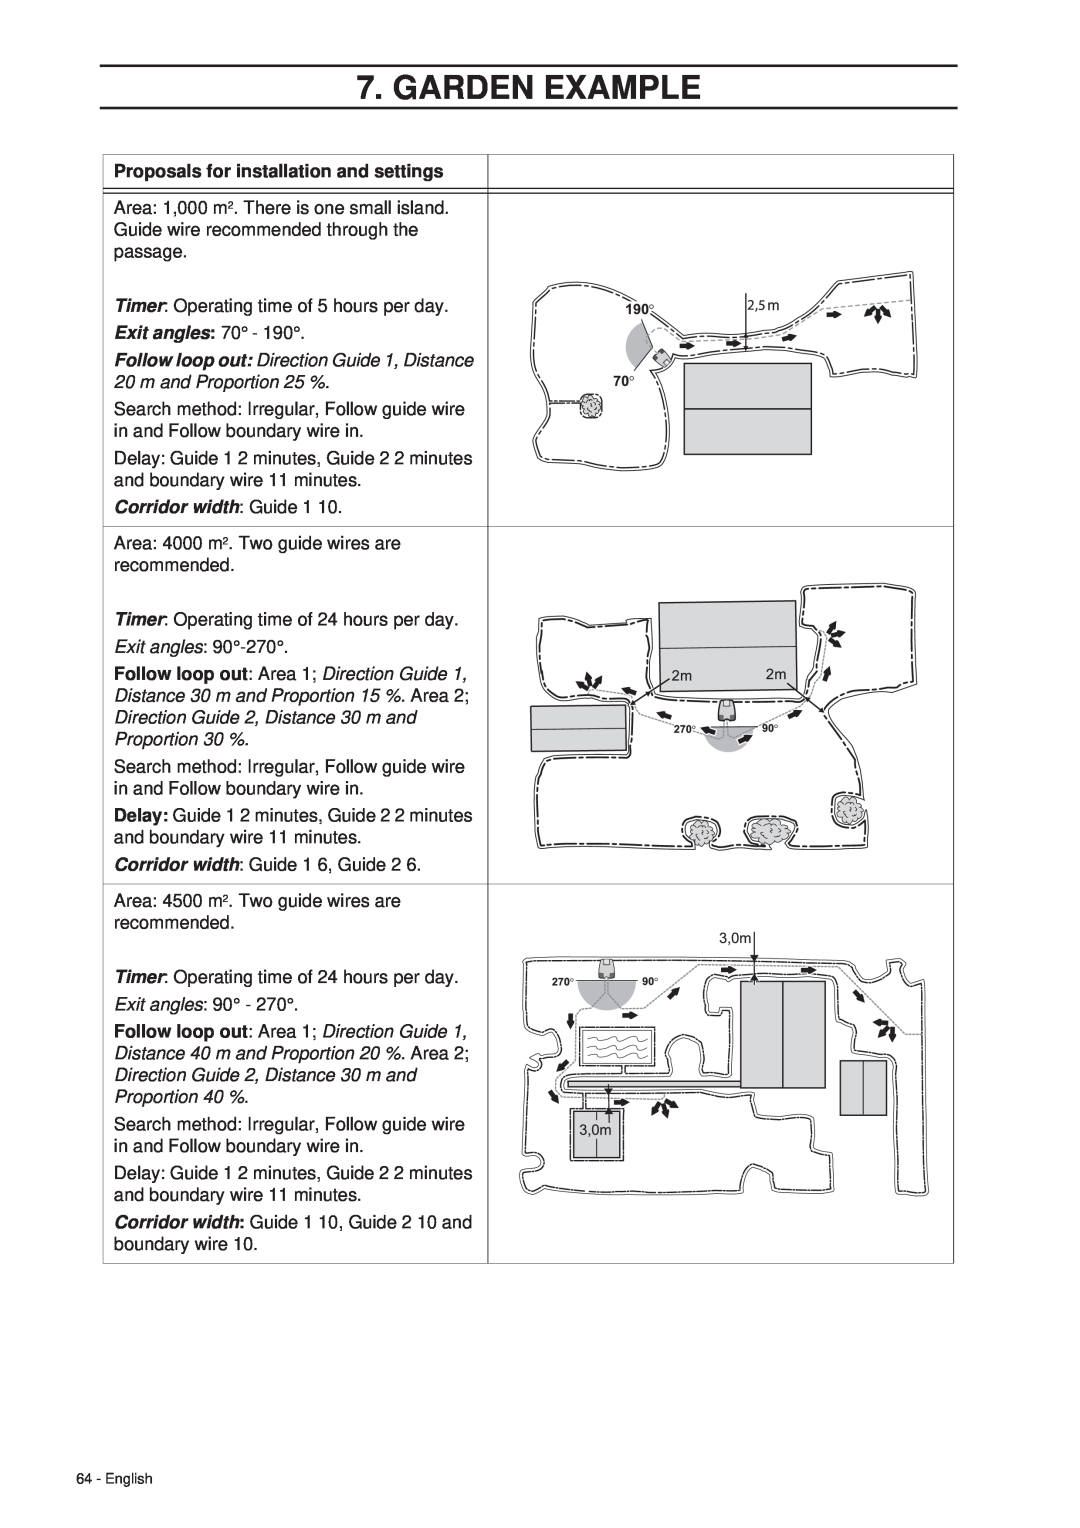 Husqvarna 265 ACX Exit angles 70, Garden Example, Proposals for installation and settings, Corridor width Guide 1, English 